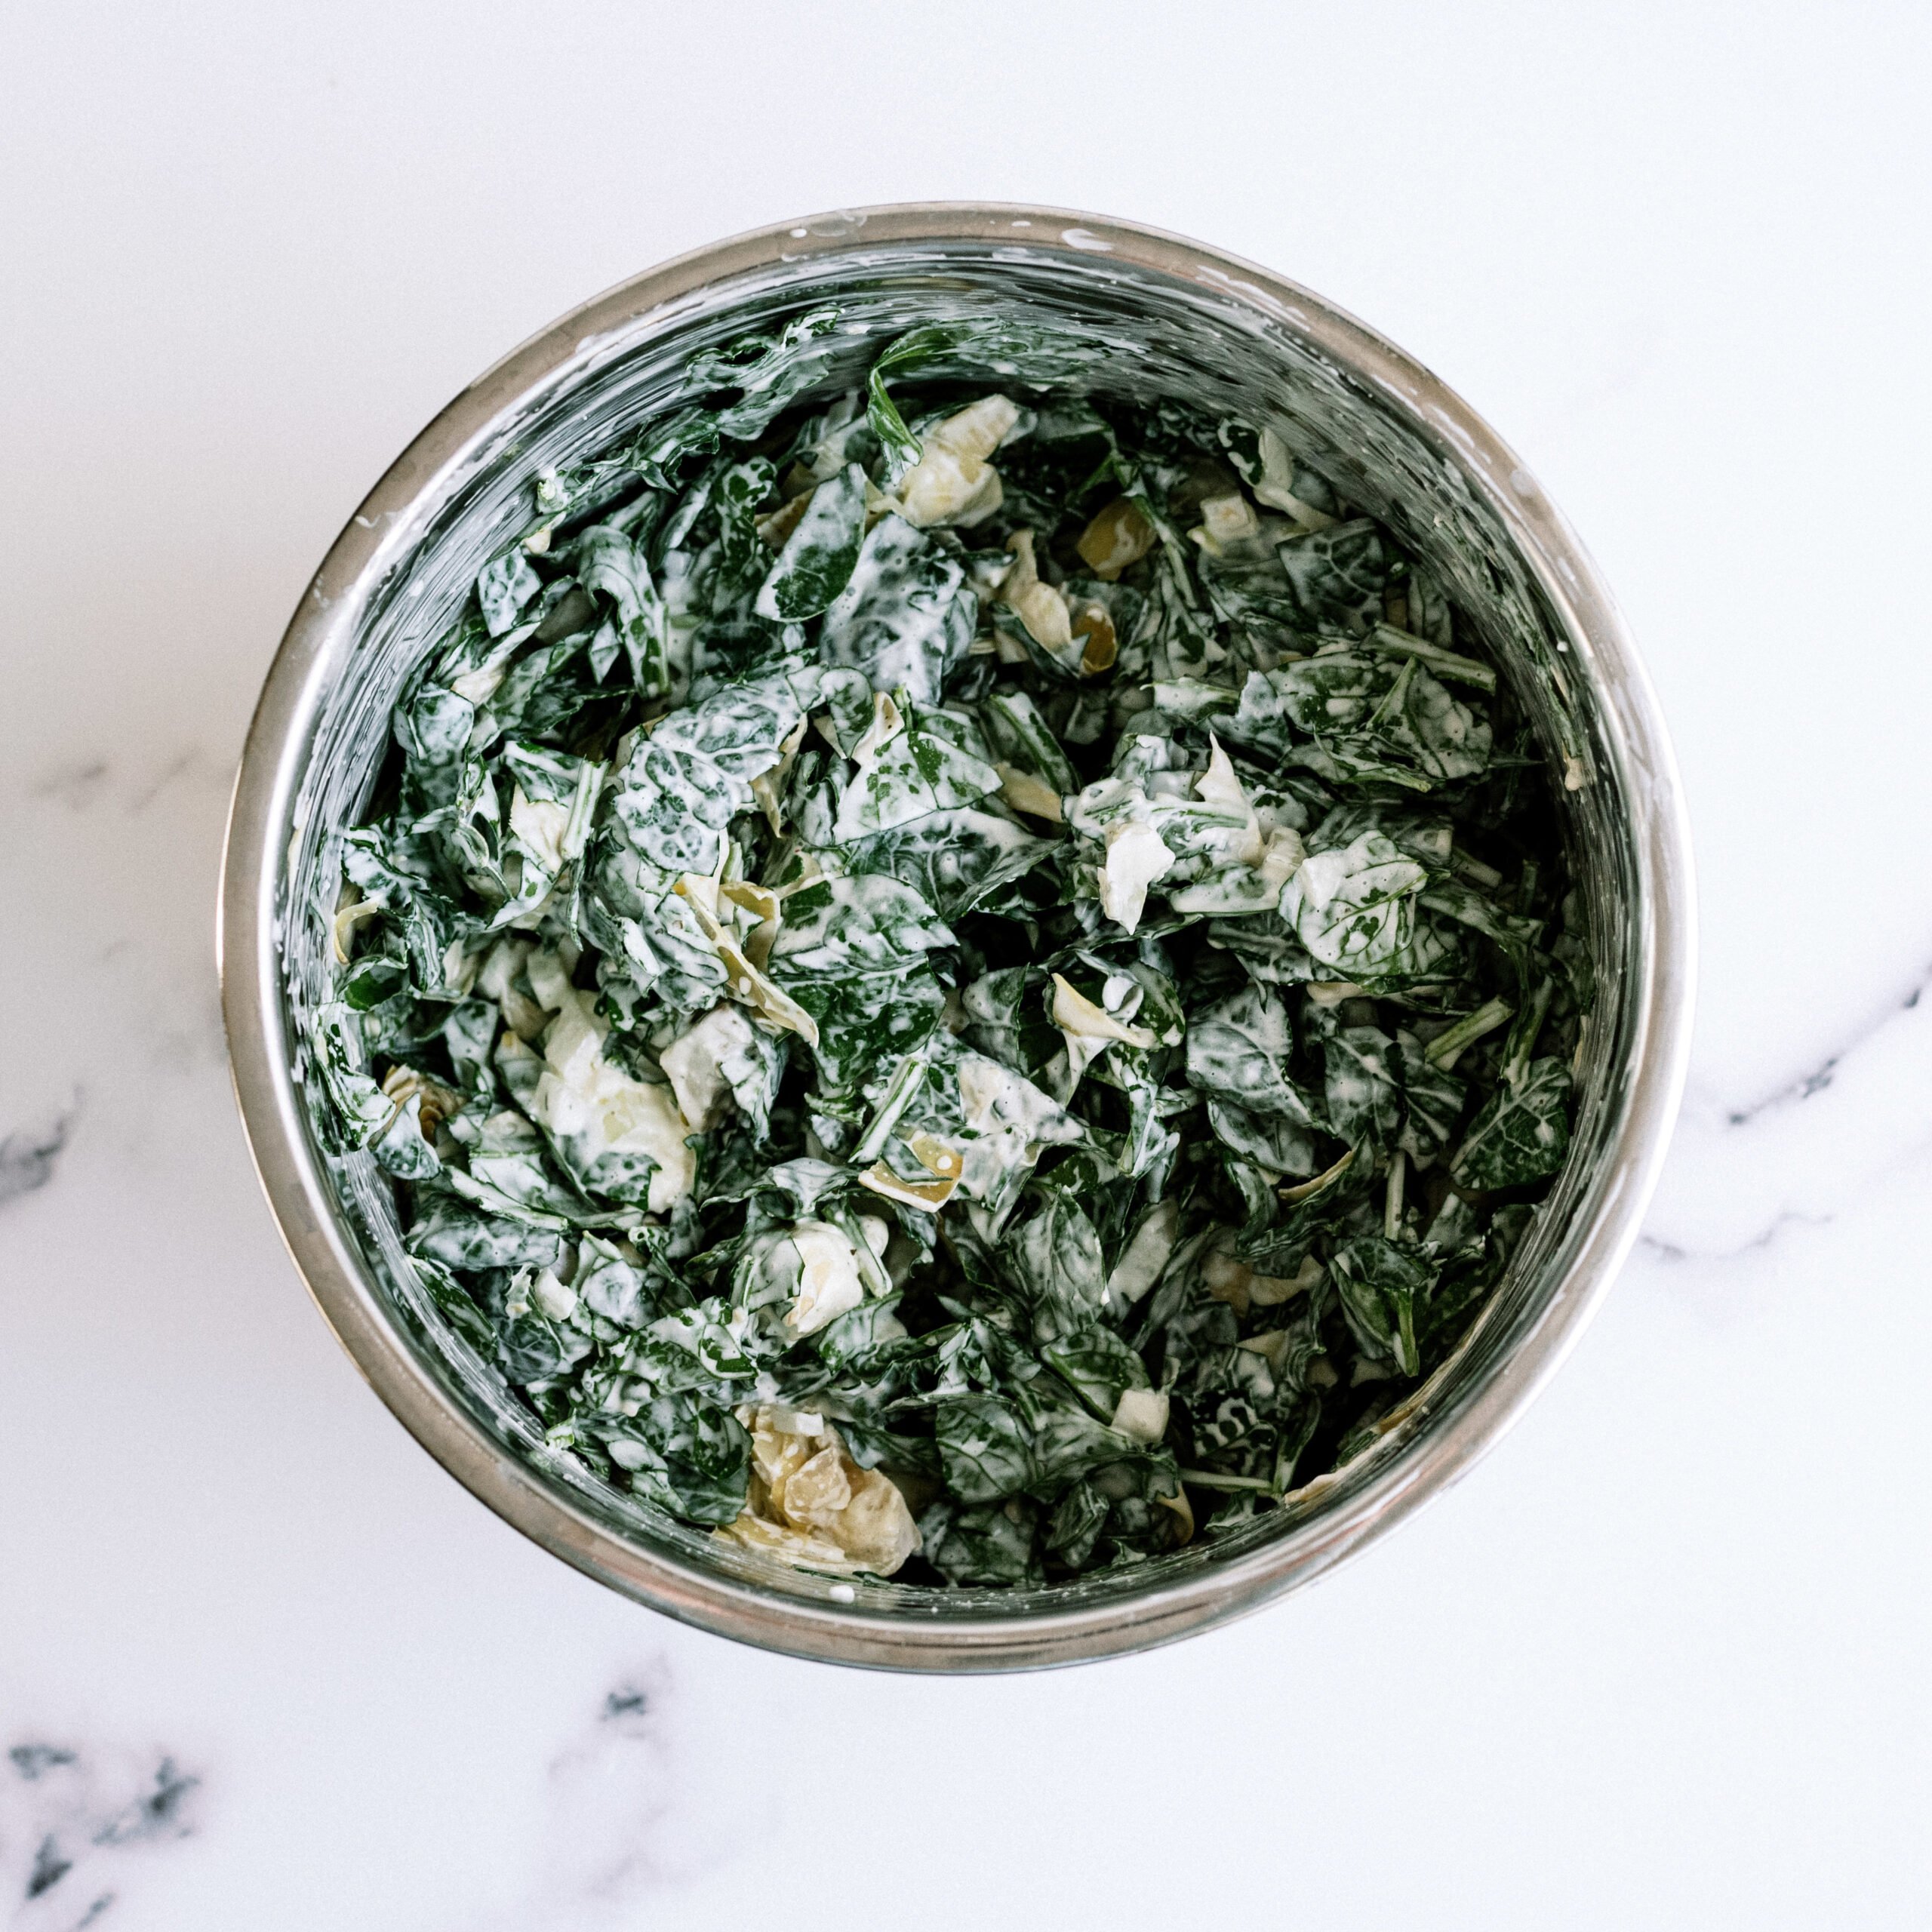 Instant Pot Spinach Artichoke dip after cooked and spinach is mixed in